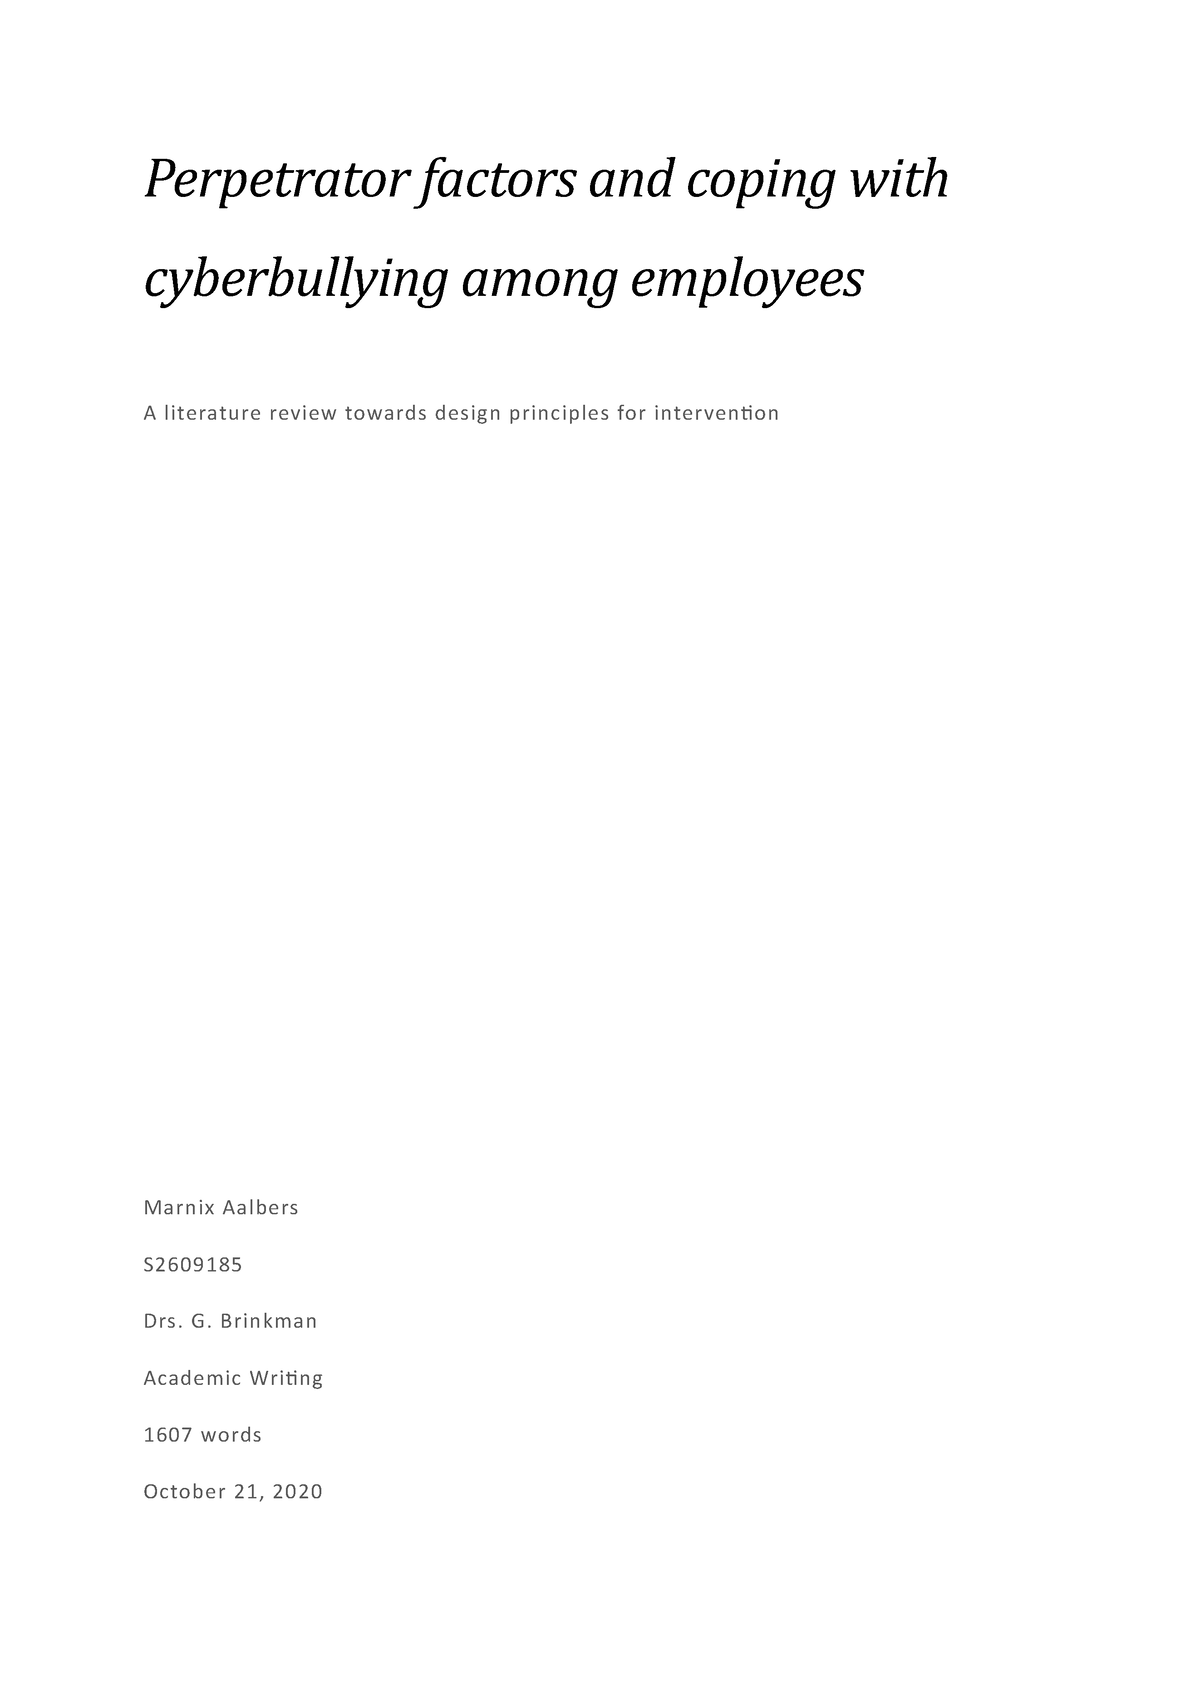 cyberbullying literature review example